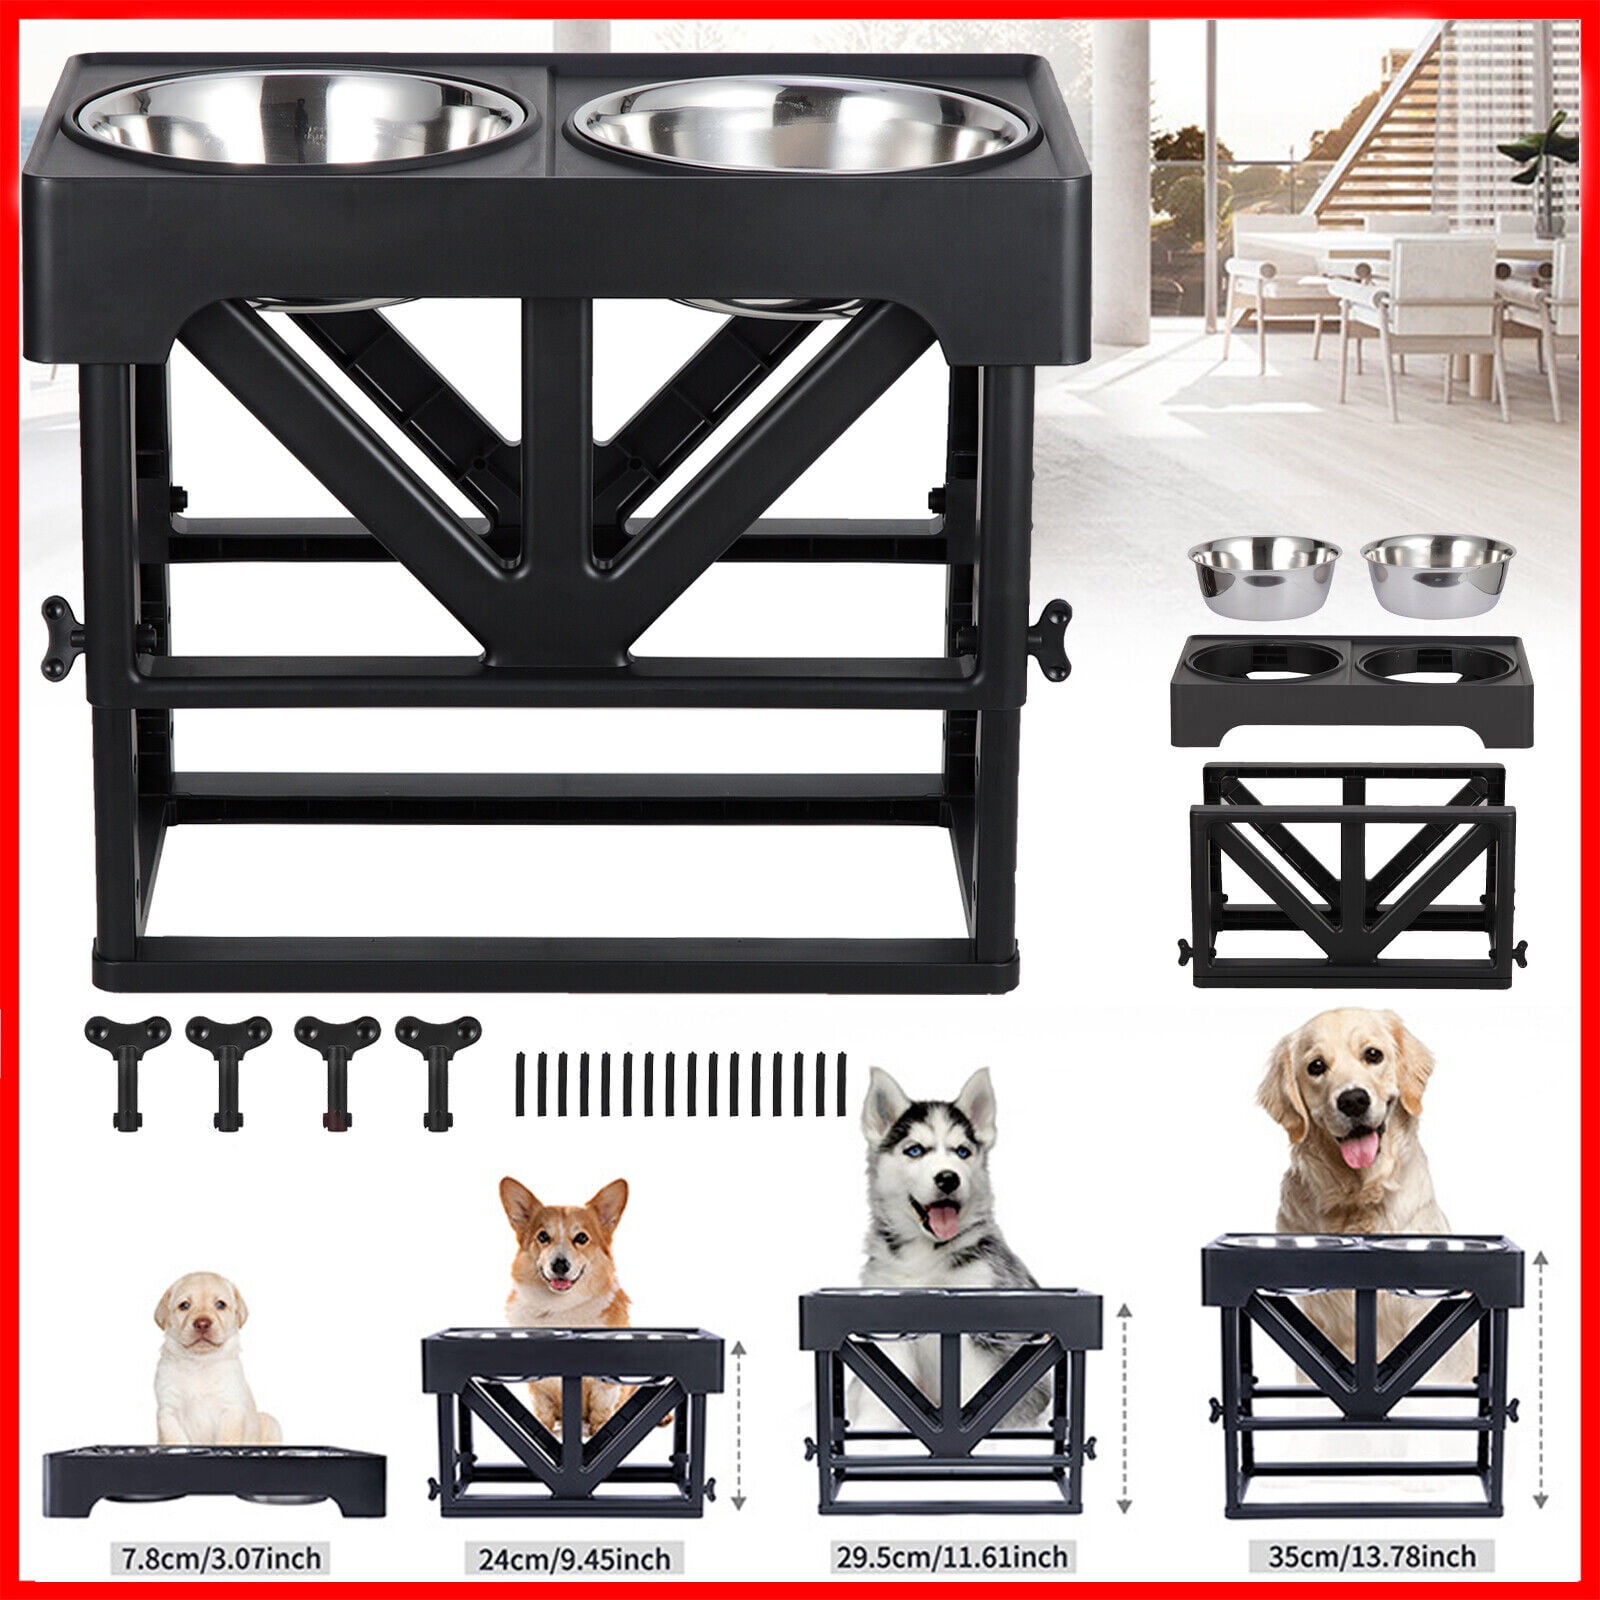 Dazone Elevated Dog & Cat Feeder - Double Bowl Raised Stand +